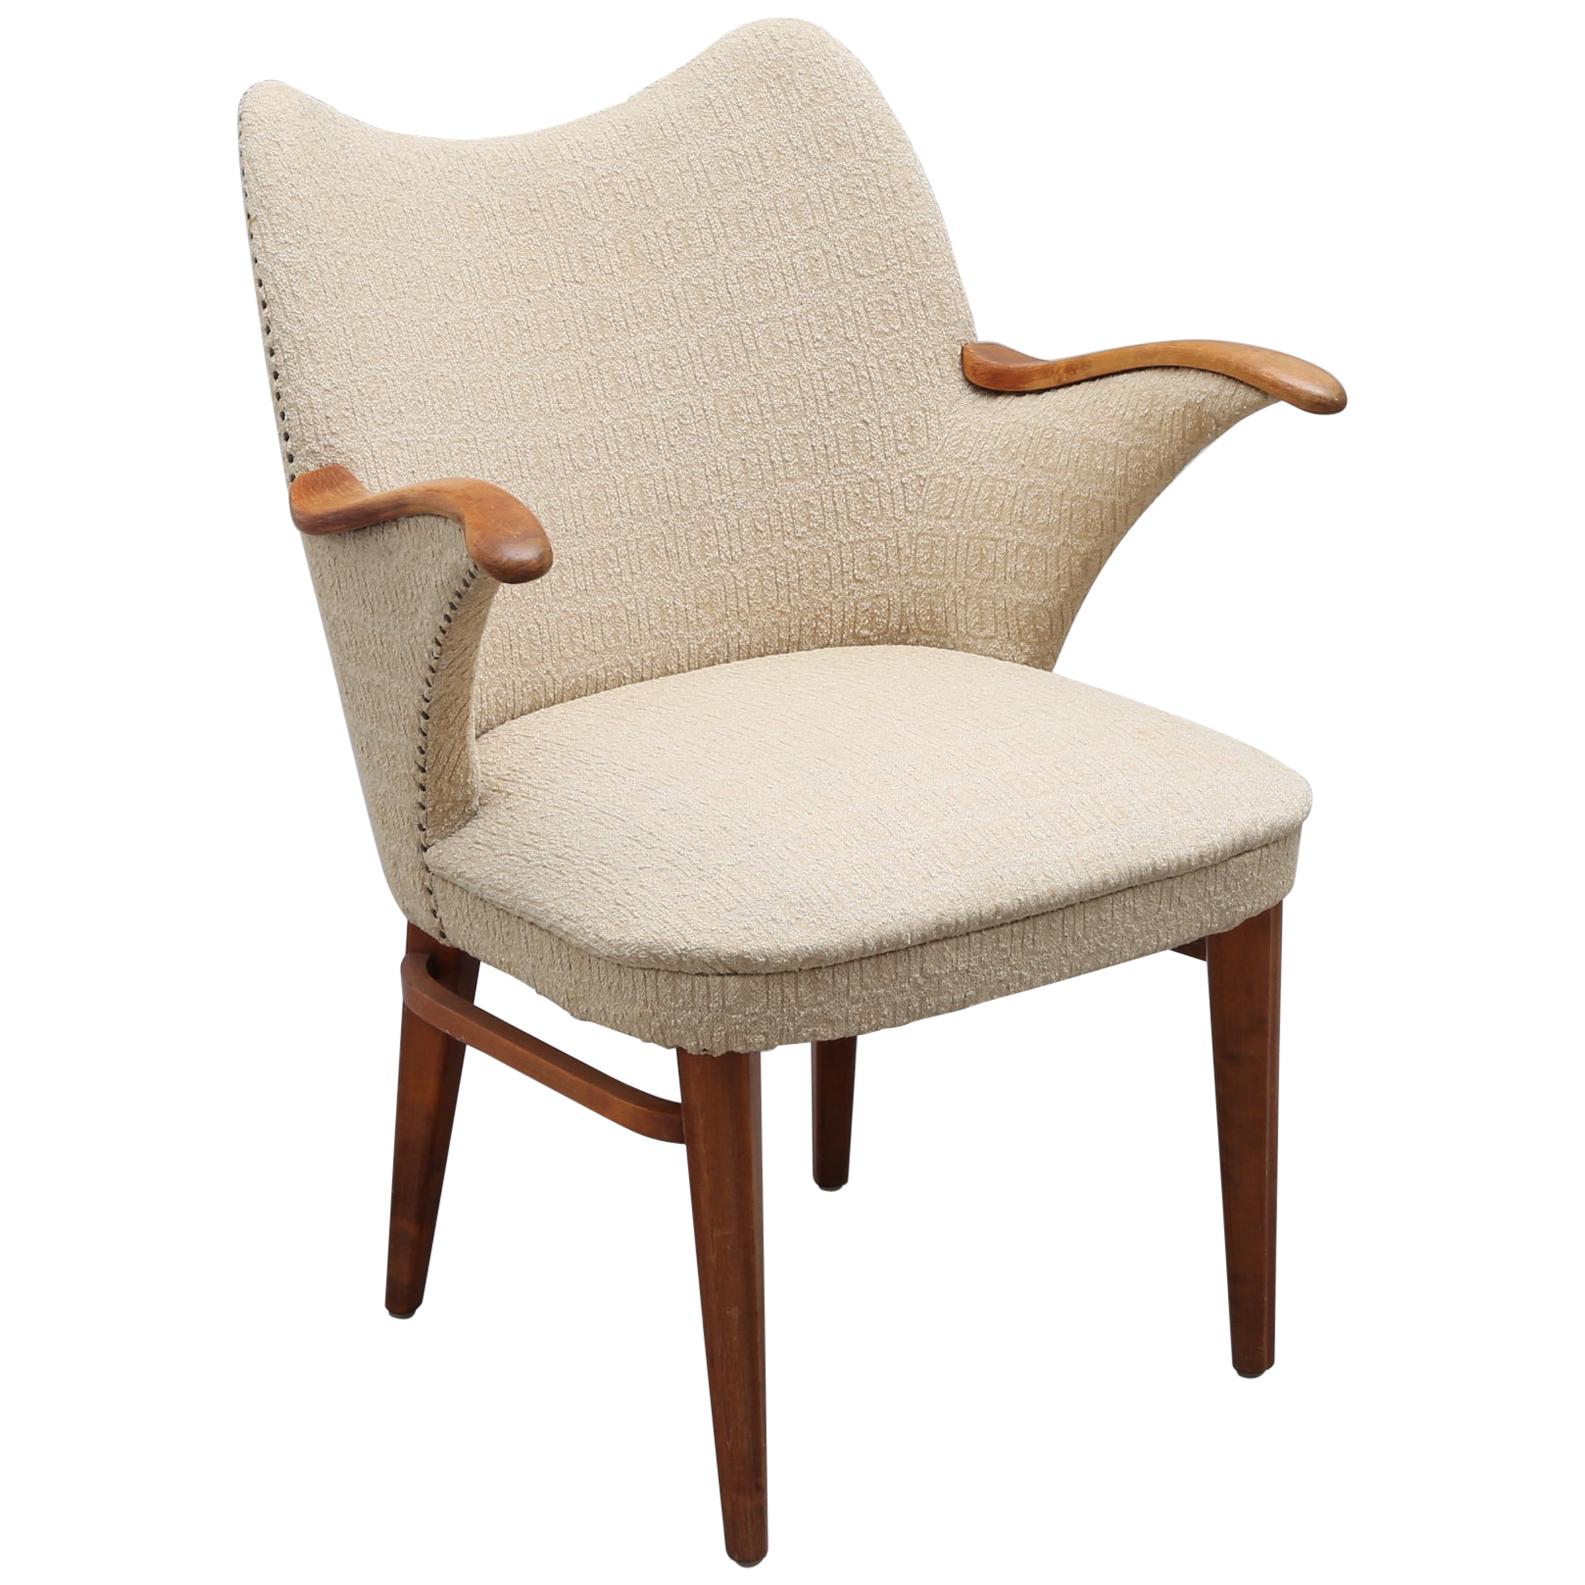 1940s Cream Midcentury Armchair or Side Chair with Exposed Wood Arms